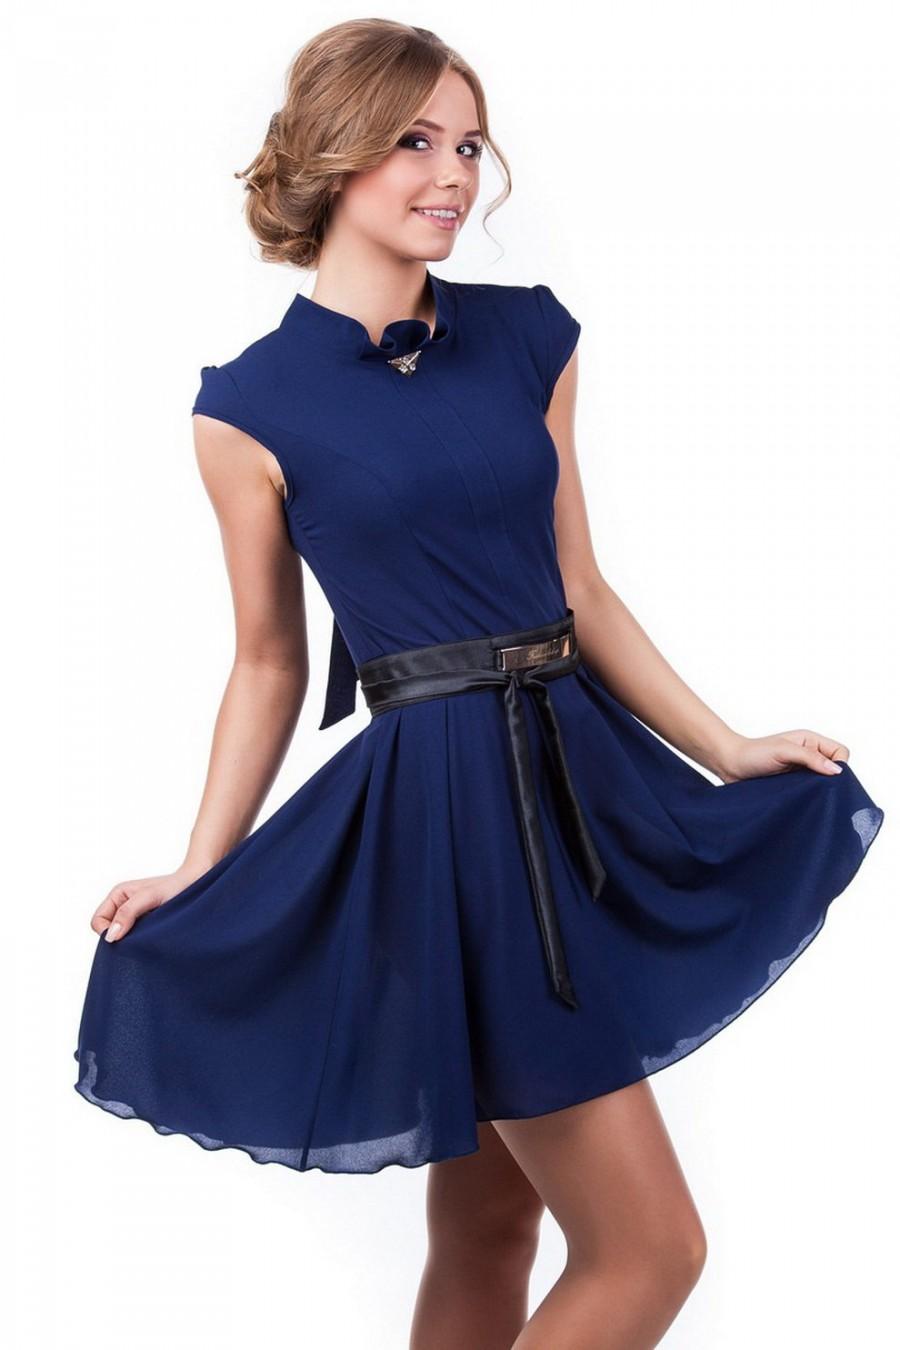 Mariage - Cocktail dress Navy blue Formal chiffon dress. Dress knee length bridesmaid. Prom flared dress with lace and bow on the back. Evening dress.